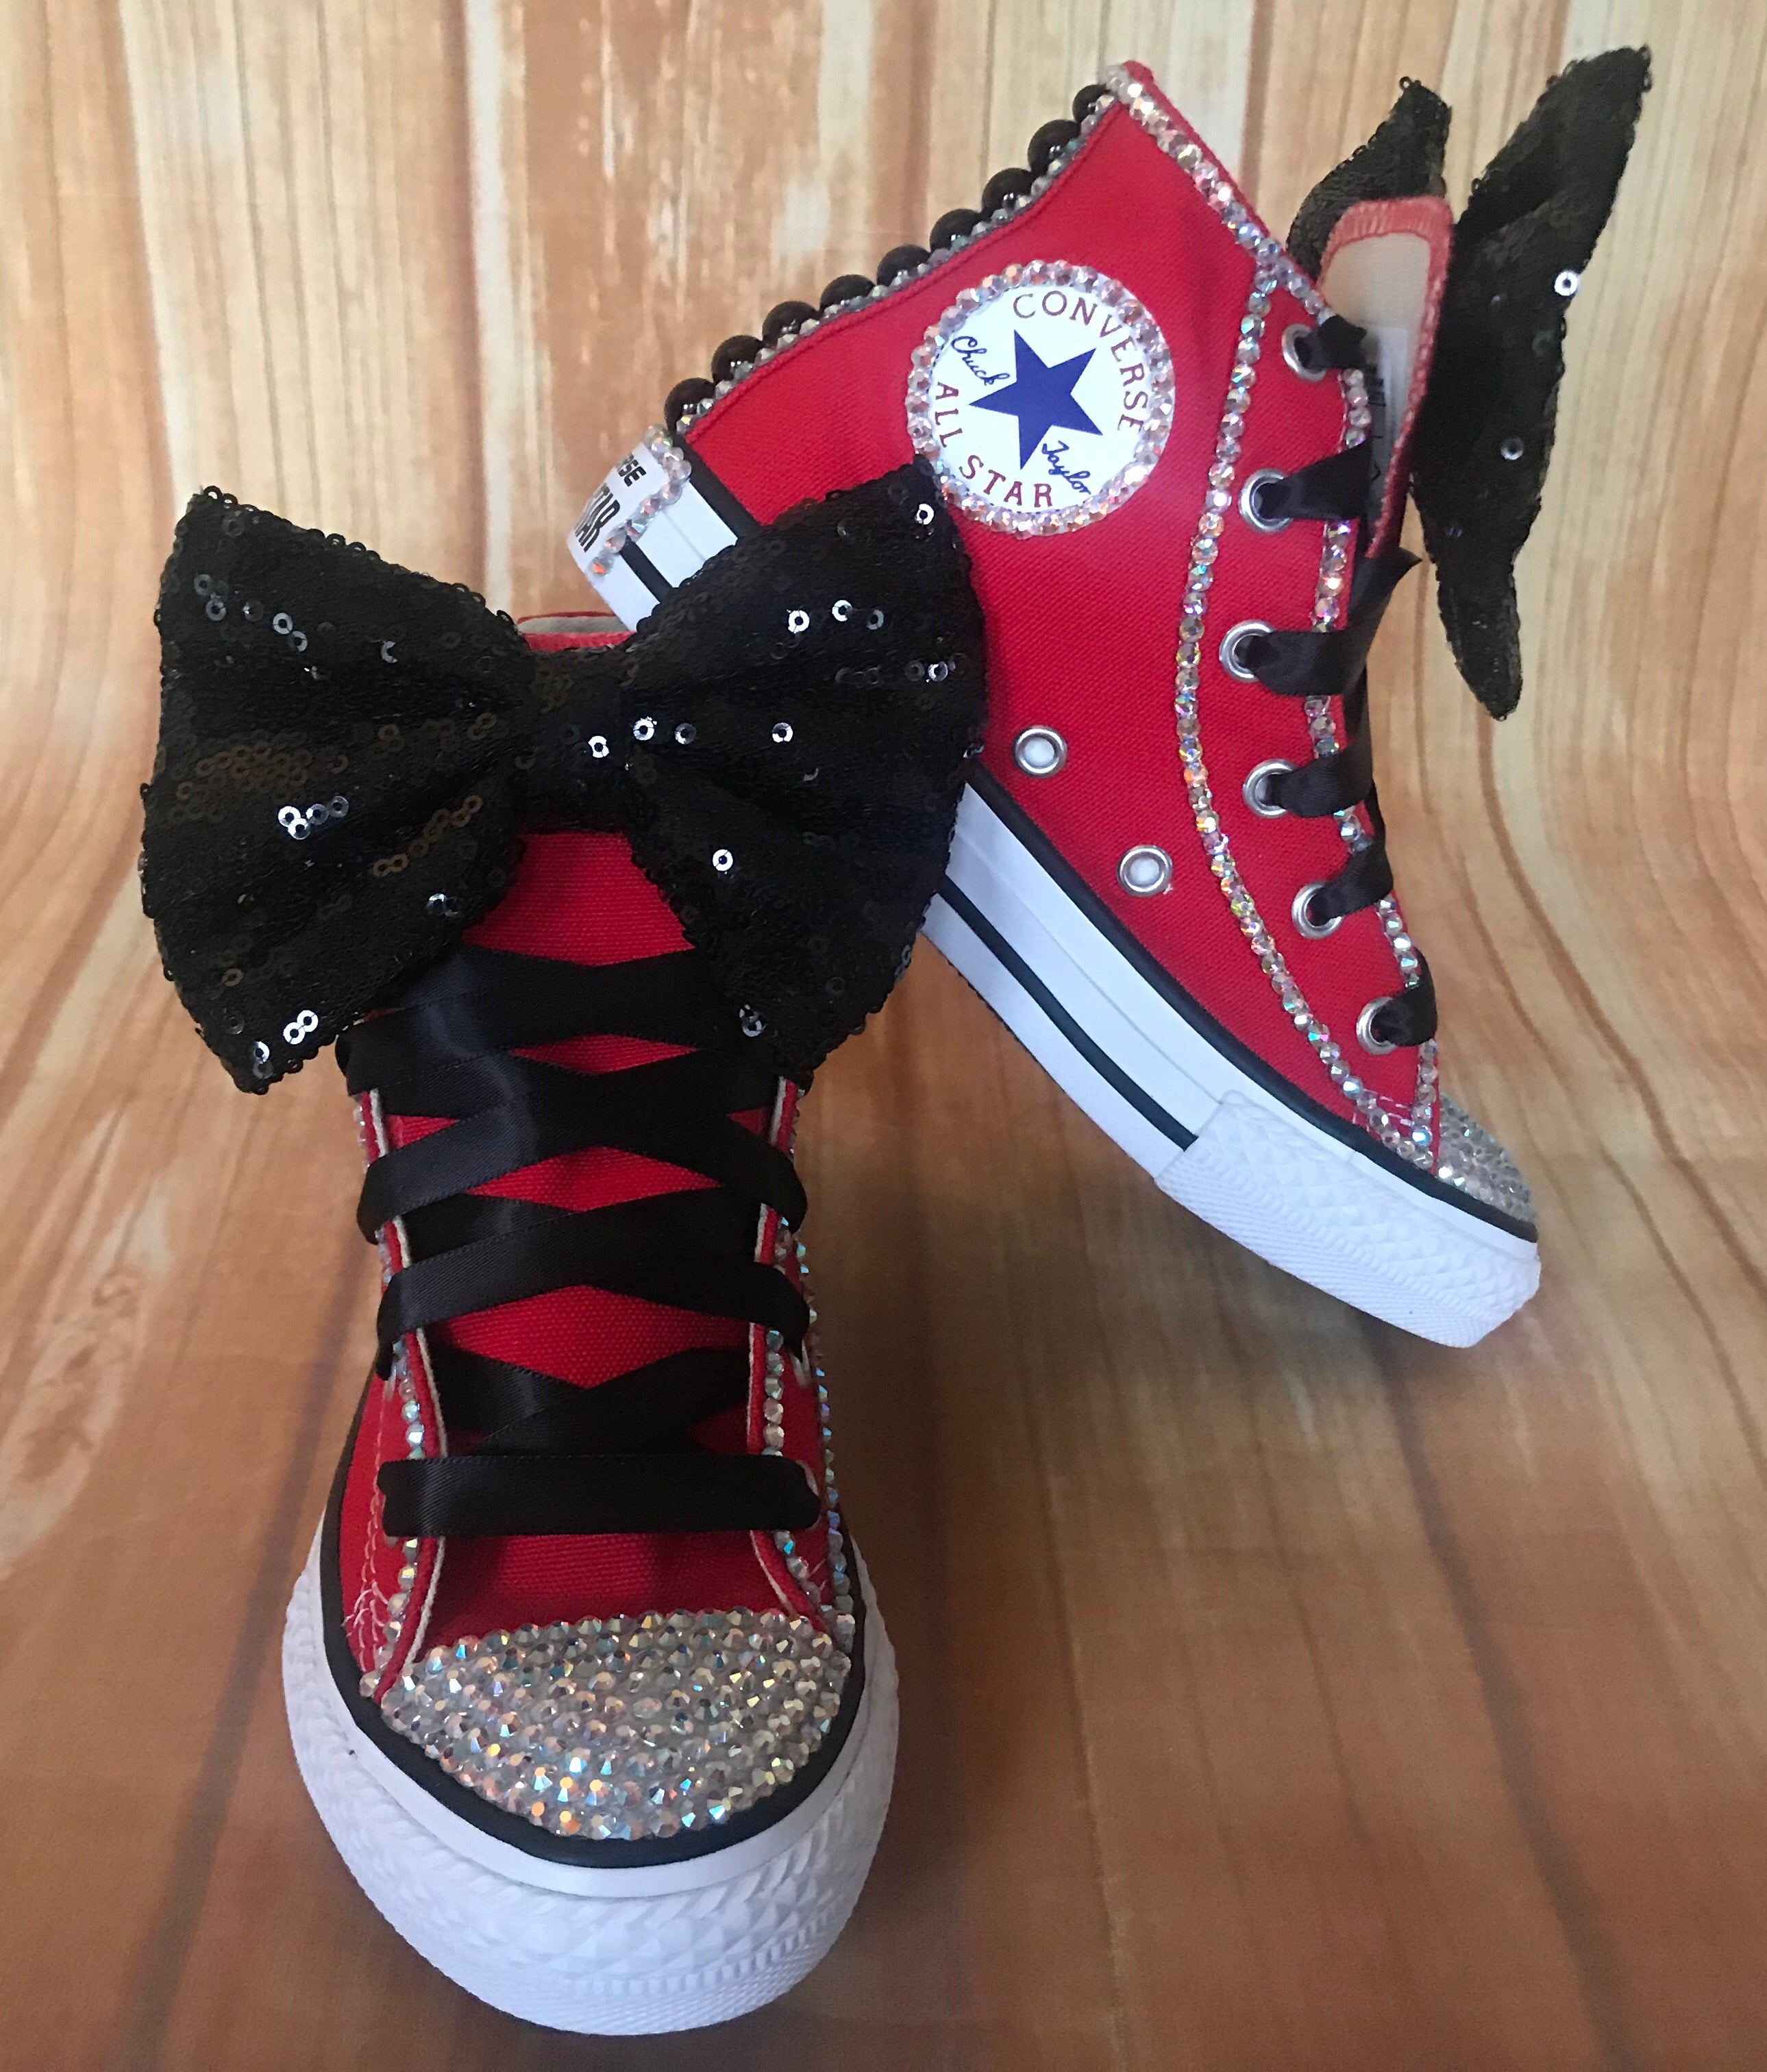 red converse youth size 2